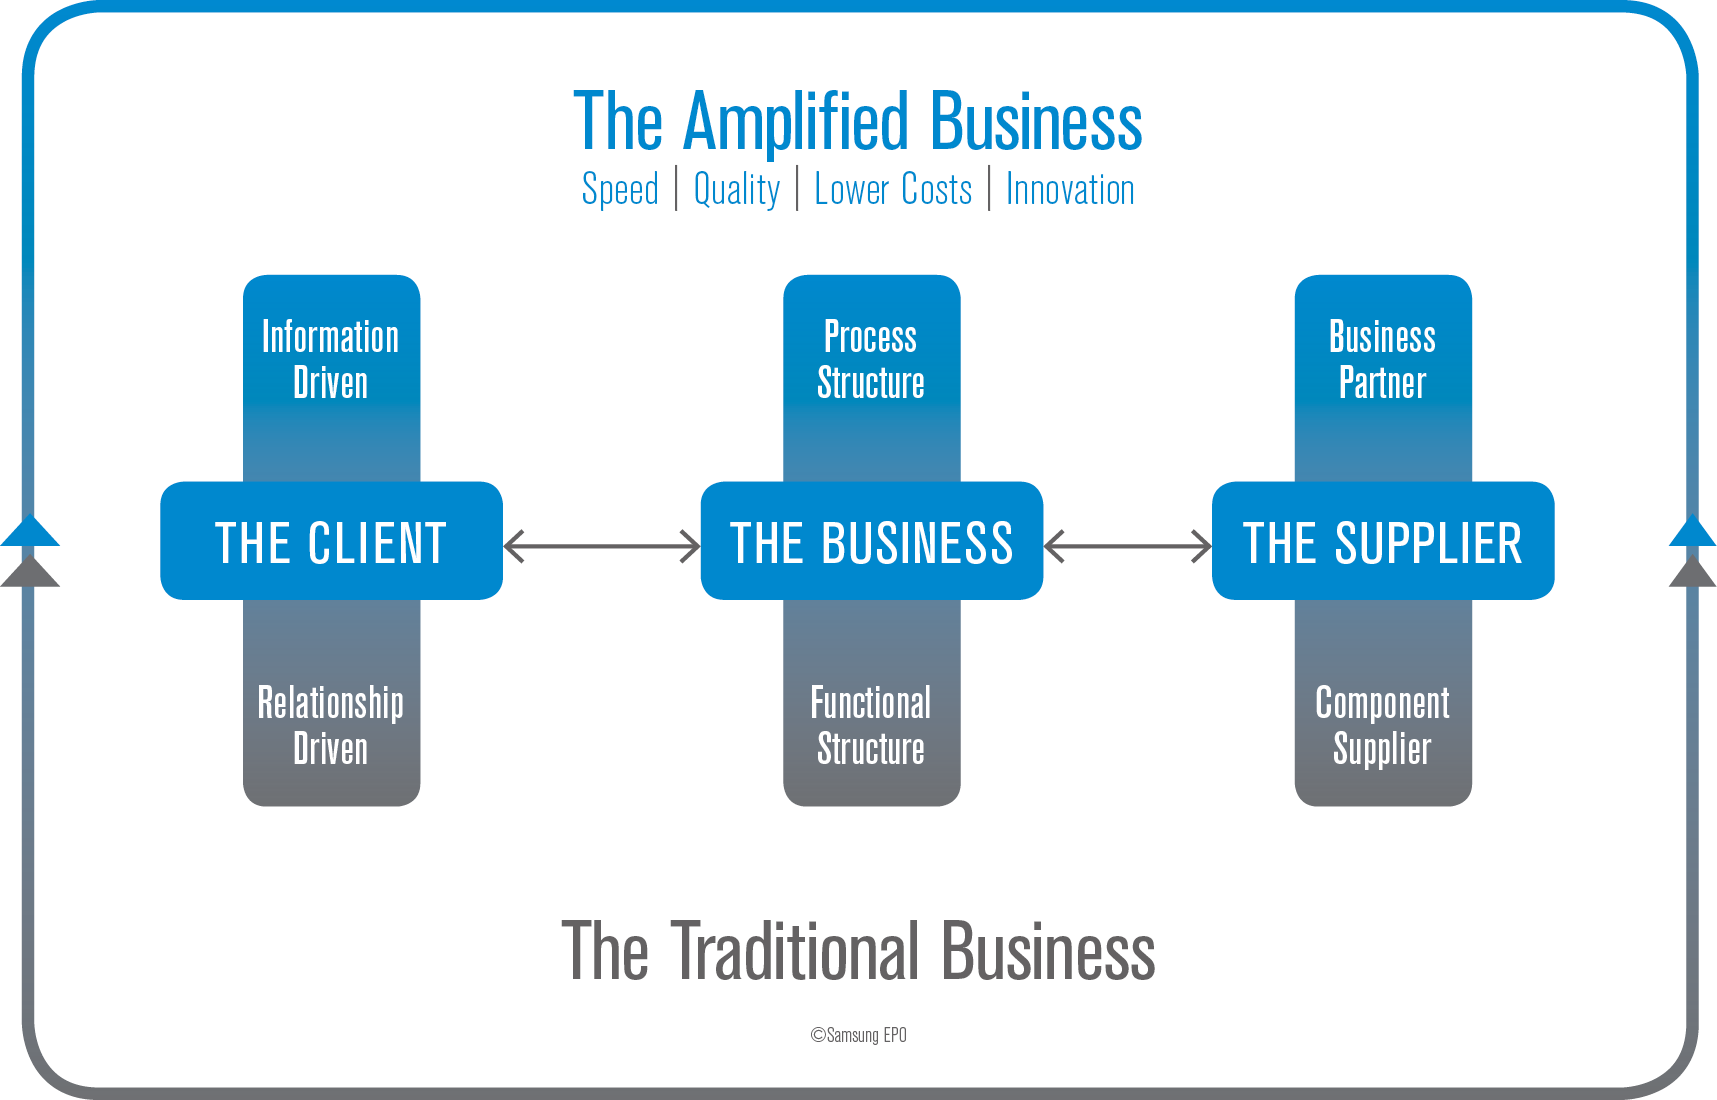 The Amplified Business